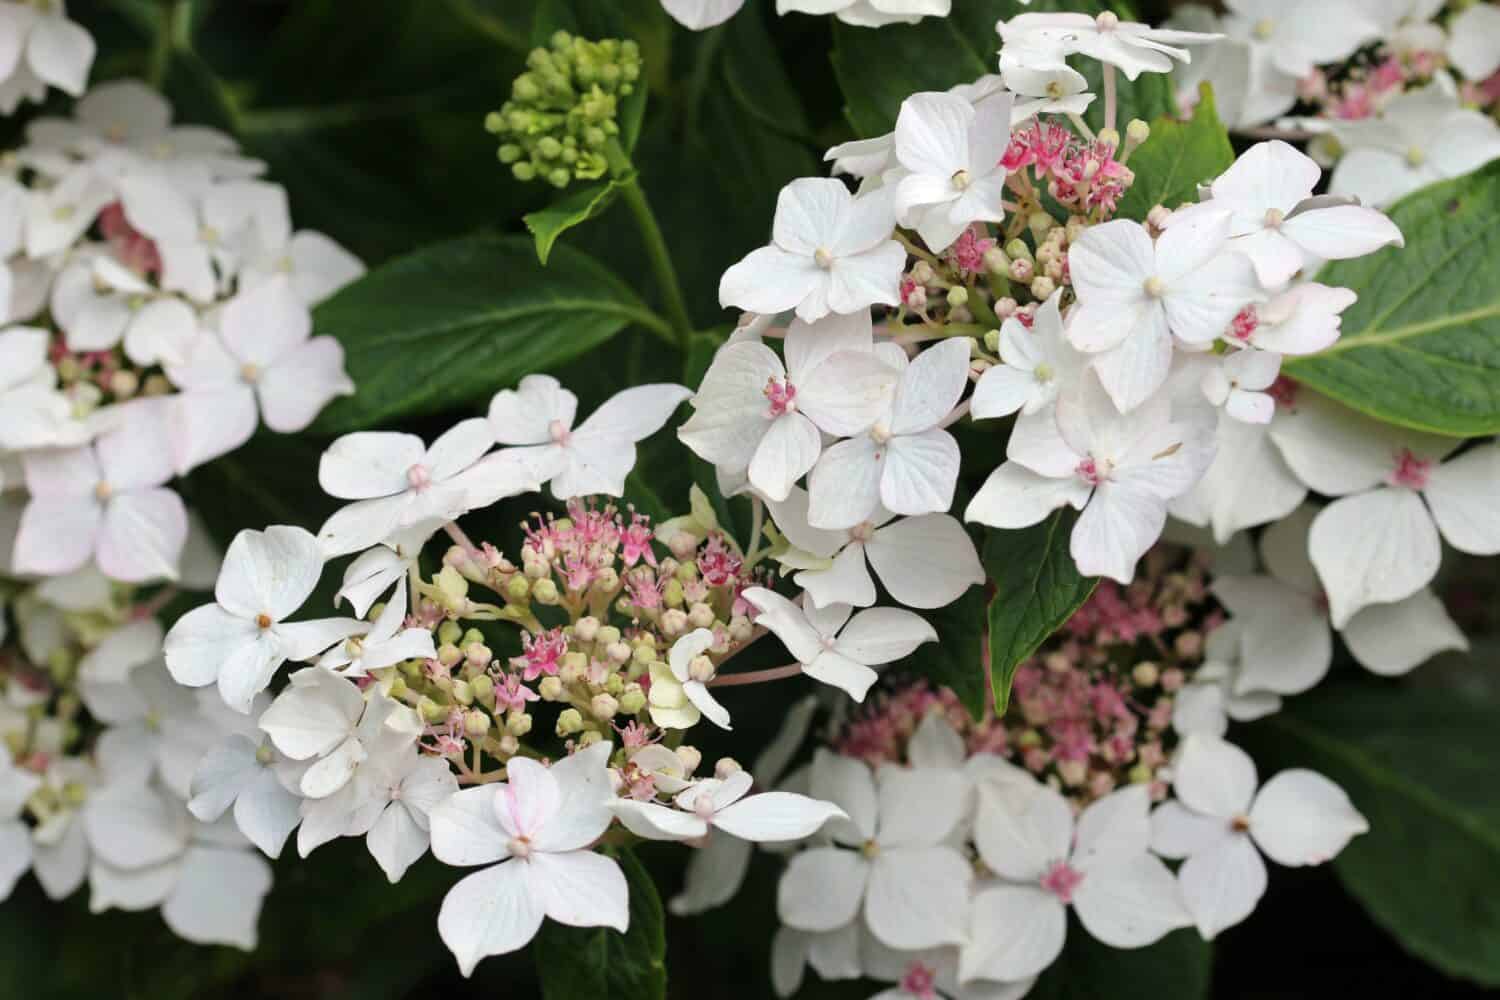 Lacecap Hydrangea macrophylla flowers with pink inner florets and white outer florets with a blurred background of leaves.